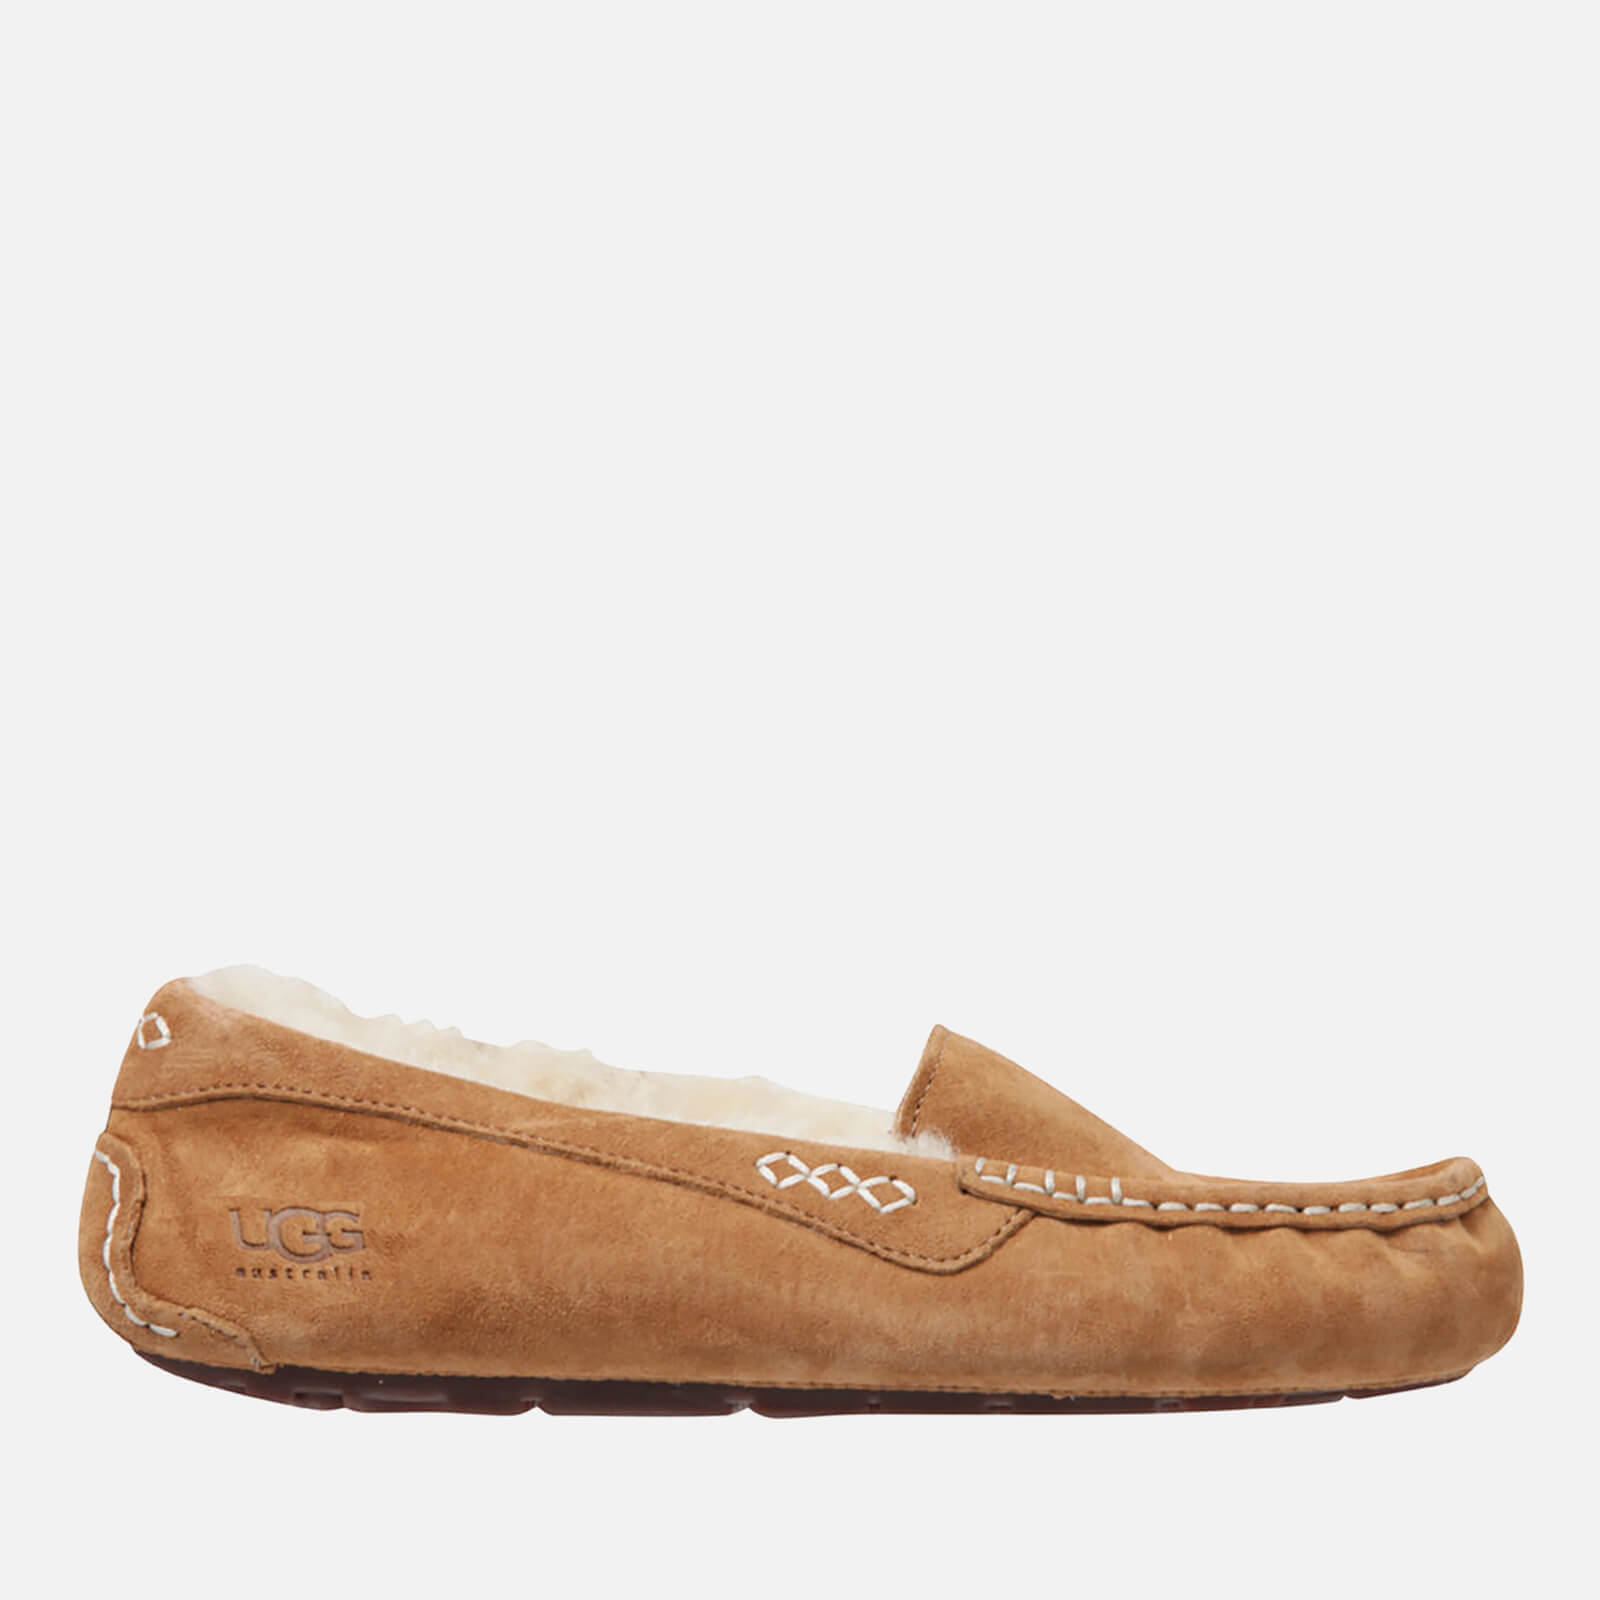 UGG Women’s Ansley Moccasin Suede Slippers - Chestnut